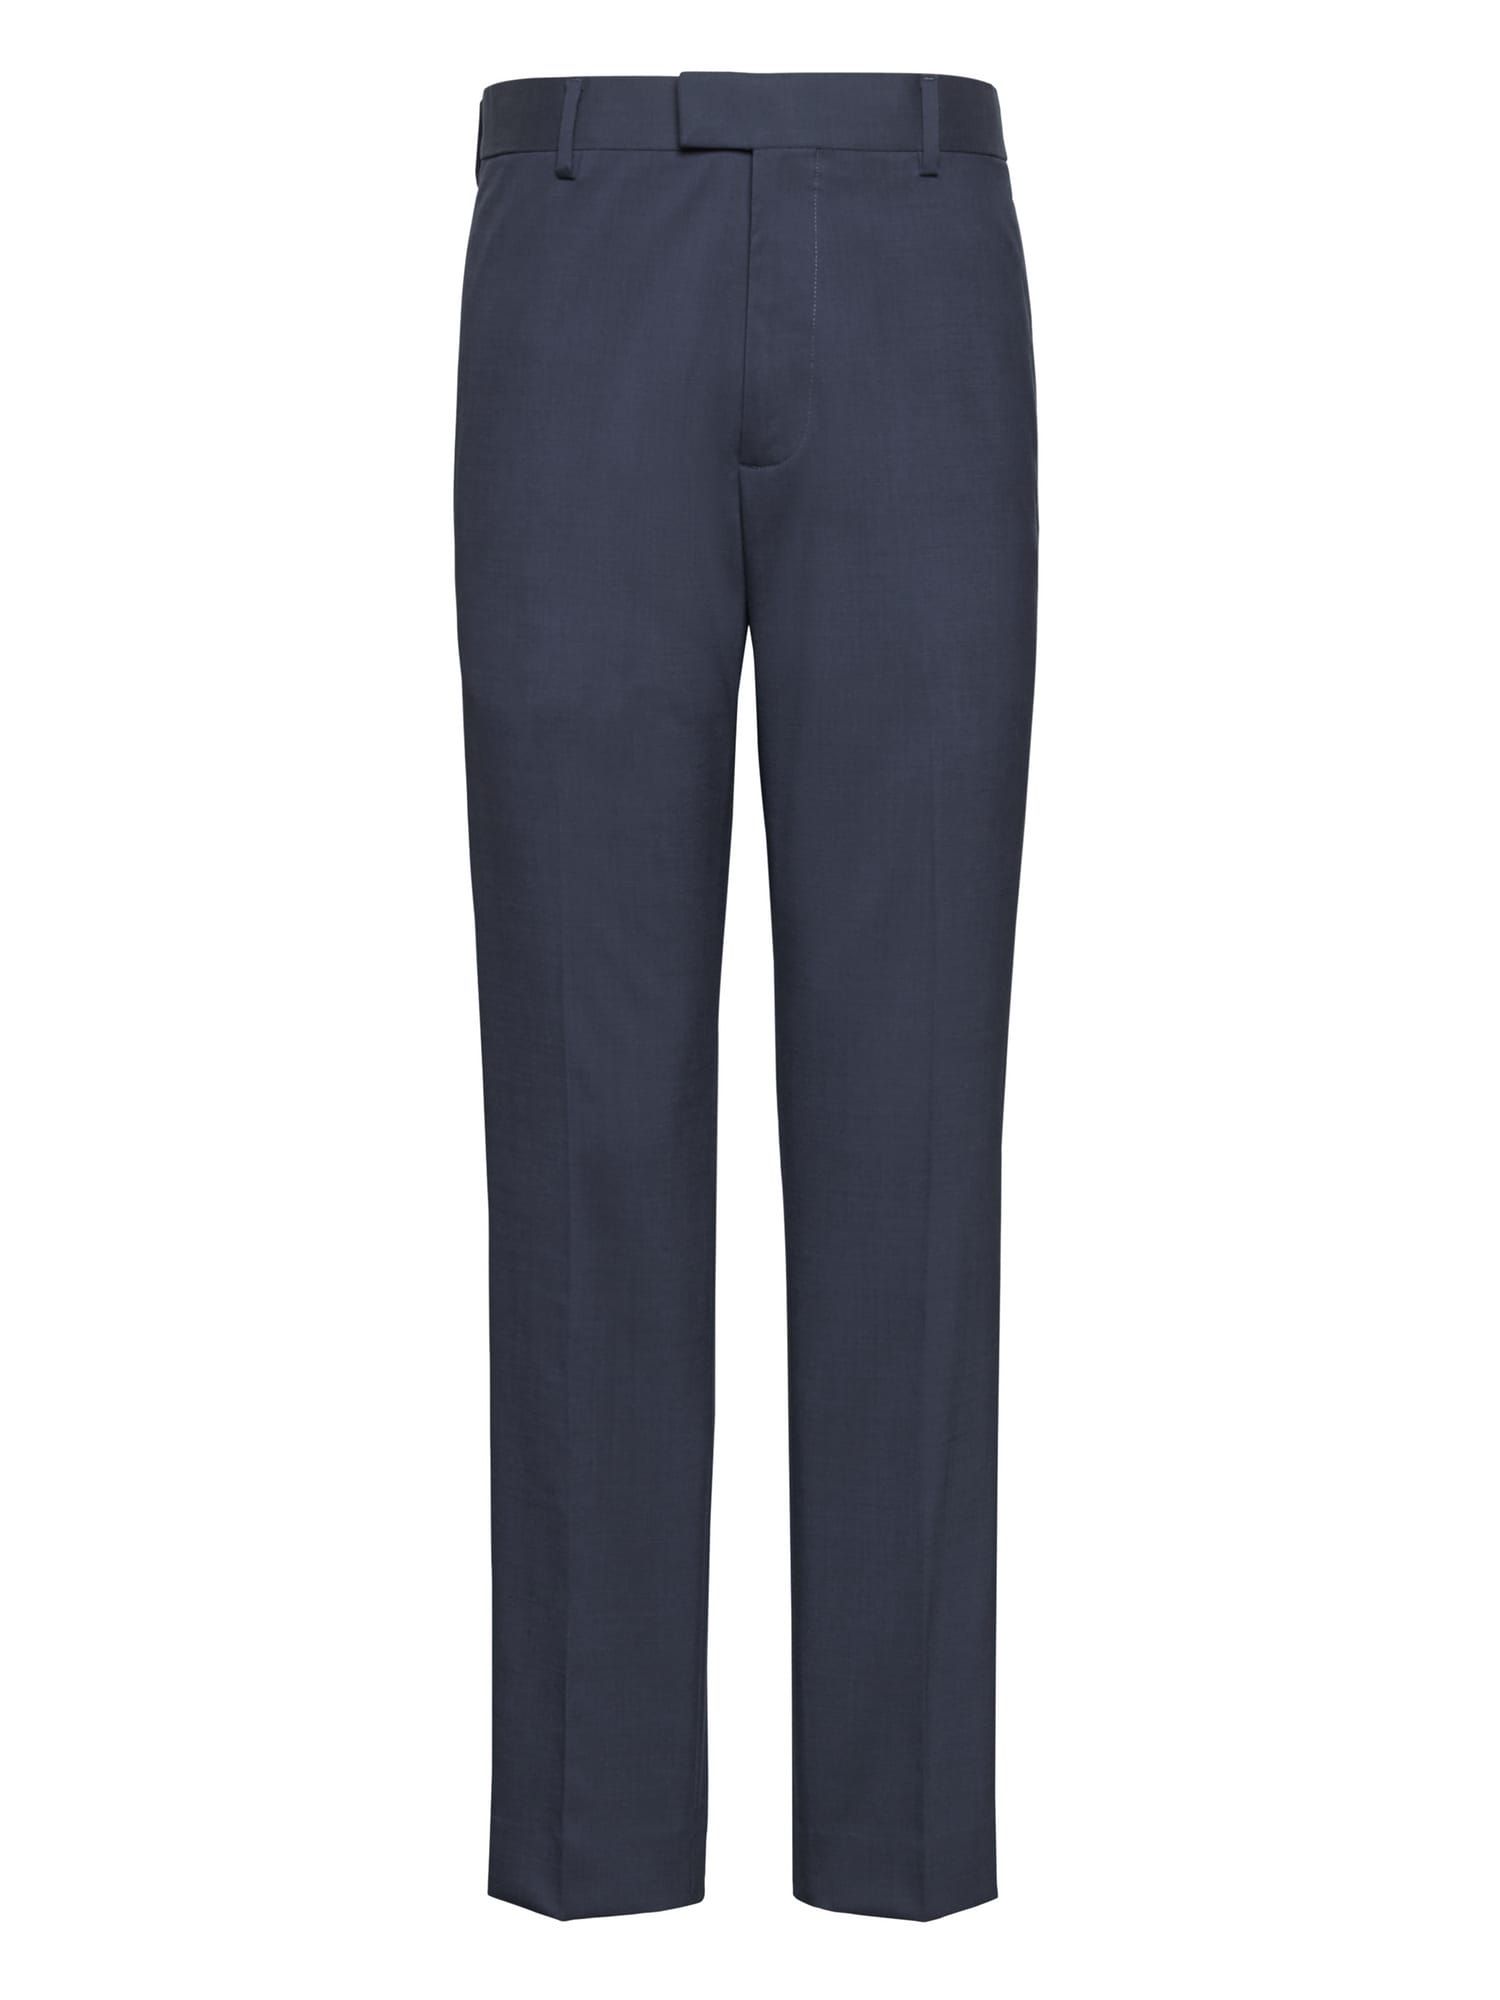 Tapered Performance Stretch Wool Pant